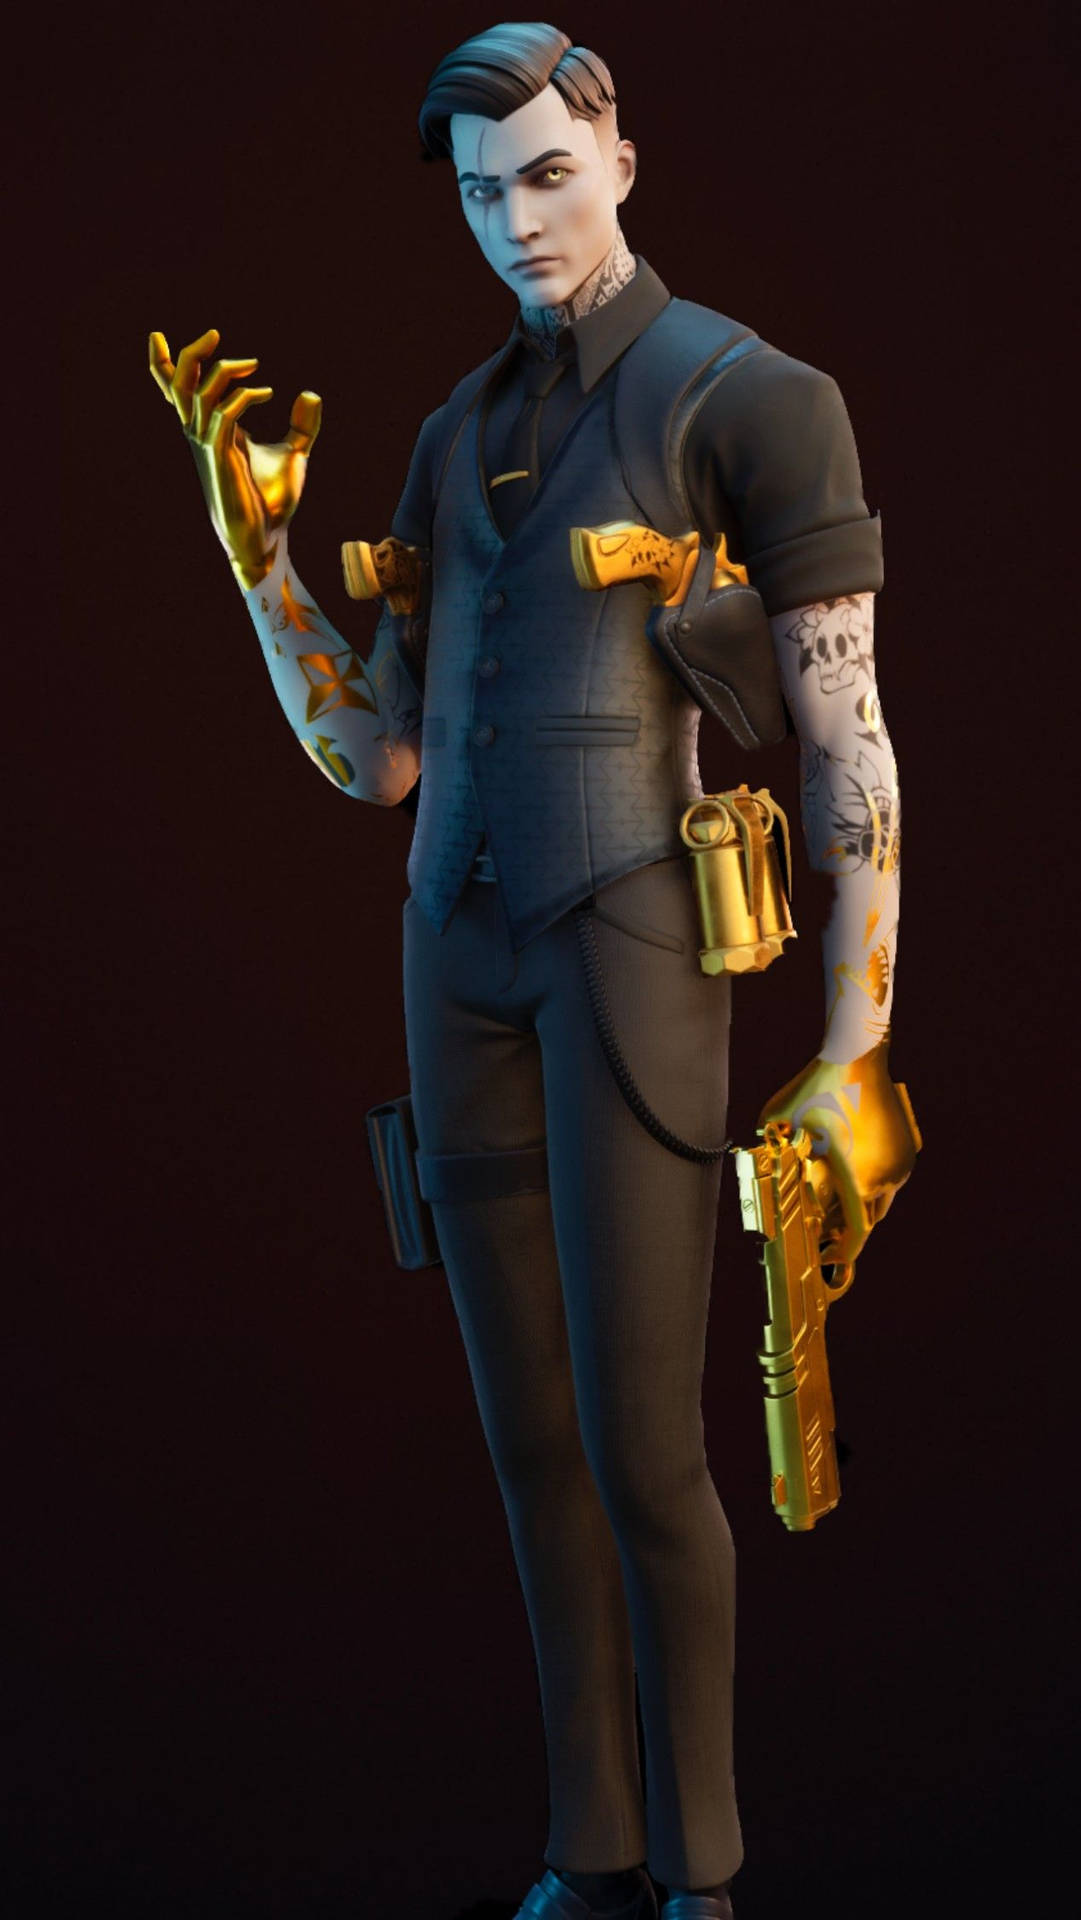 Dress to impress with the Midas Skin in Fortnite. Wallpaper